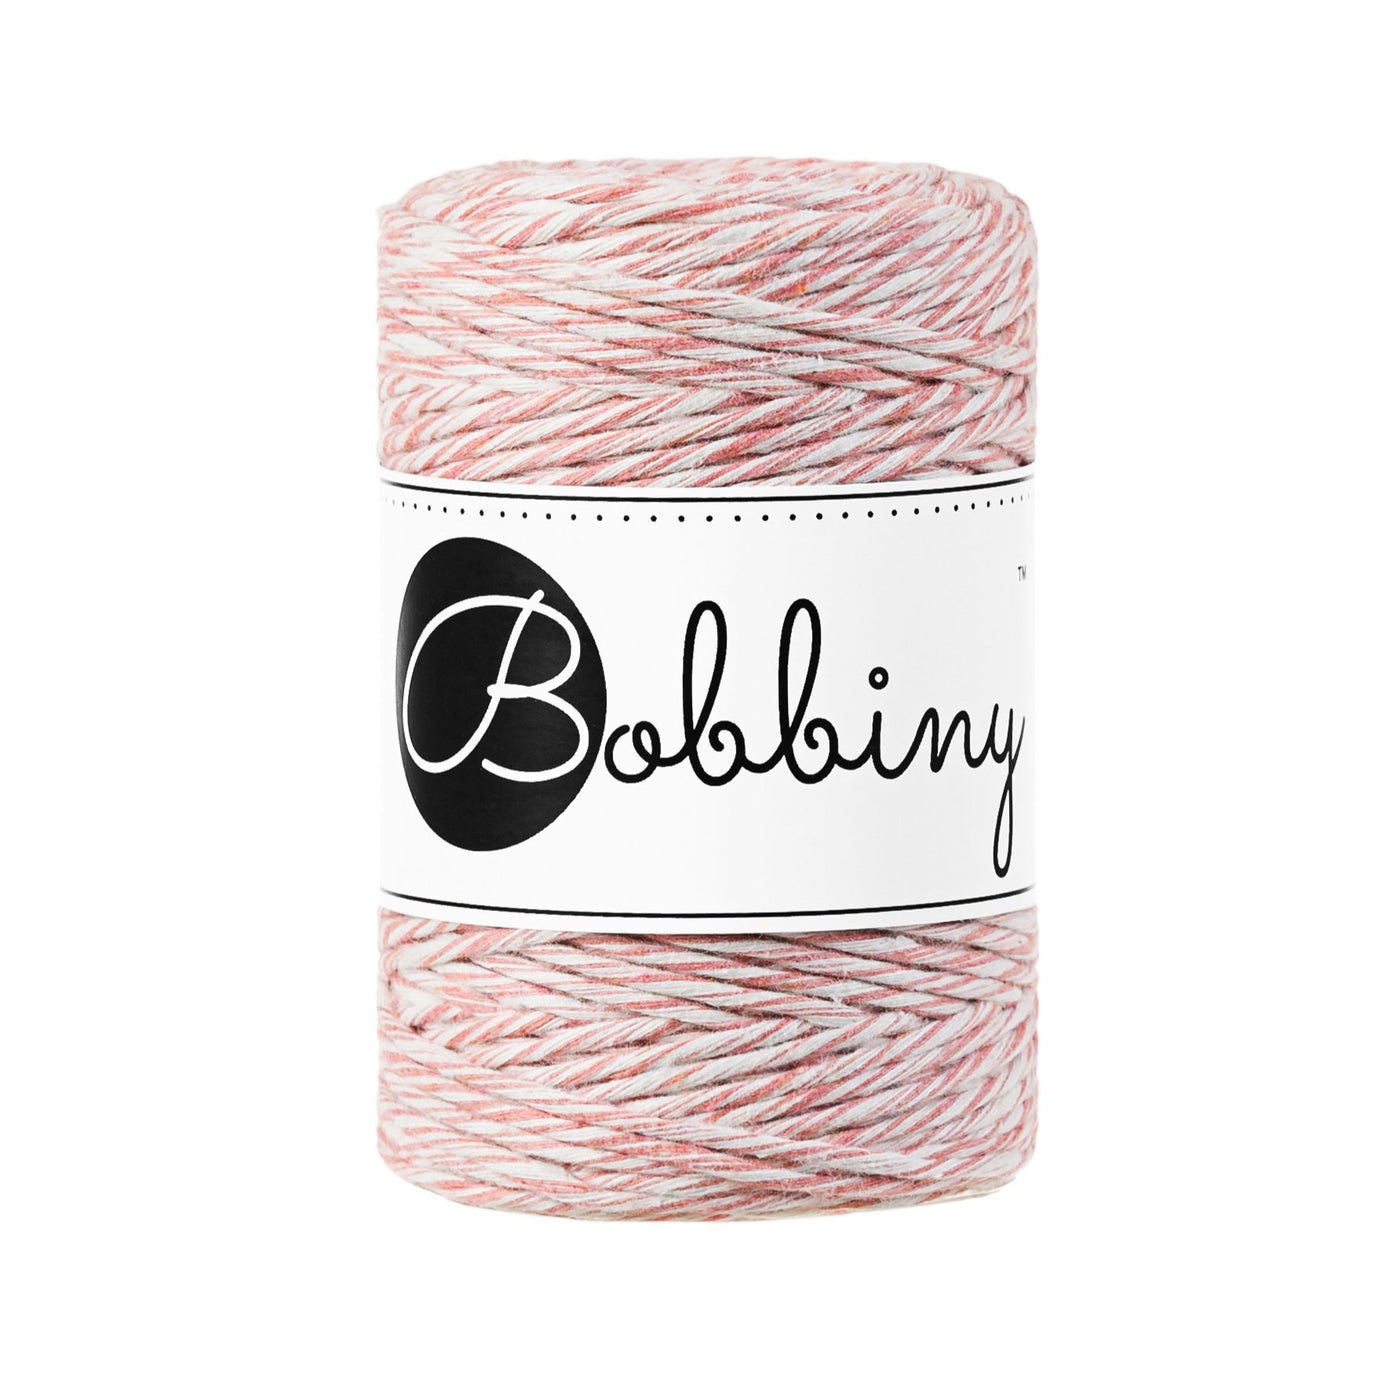 A beautiful mix of the shades BLUSH & NATURAL, this new addition to the Bobbiny range will make your fibre creations sing!  This super soft cord knots beautifully and makes a wonderful fringe.  Premium Macrame Cord 1.5mm  Length: 108 yards (100m)  Weight: 160gms  ﻿Single Twist  100% recycled cotton  28 Fibres 